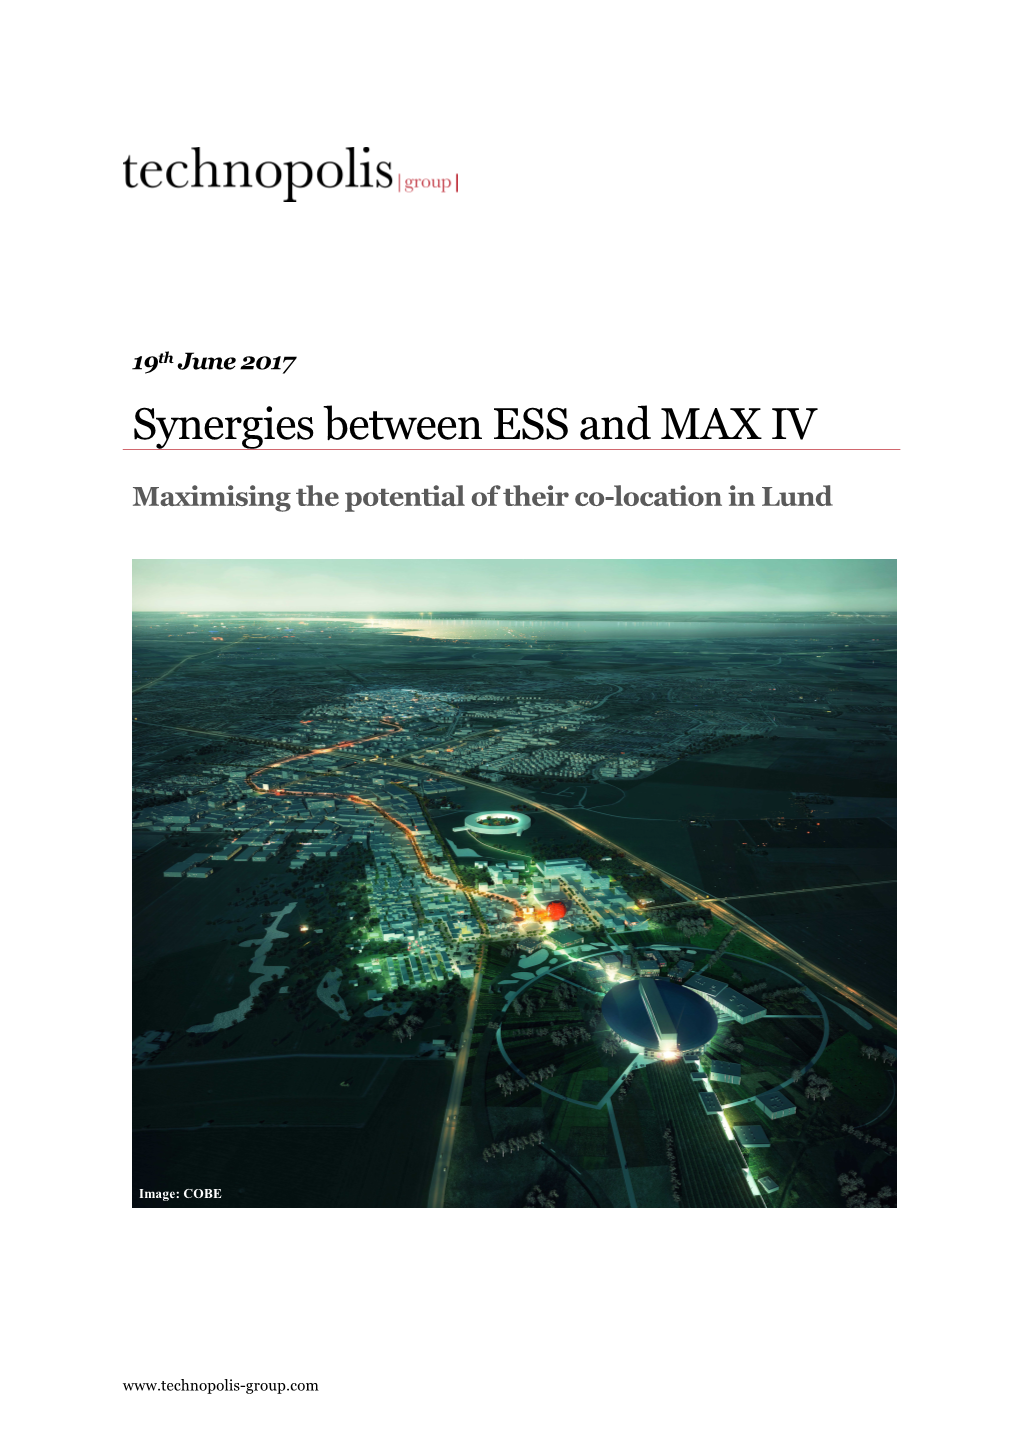 Synergies Between ESS and MAX IV